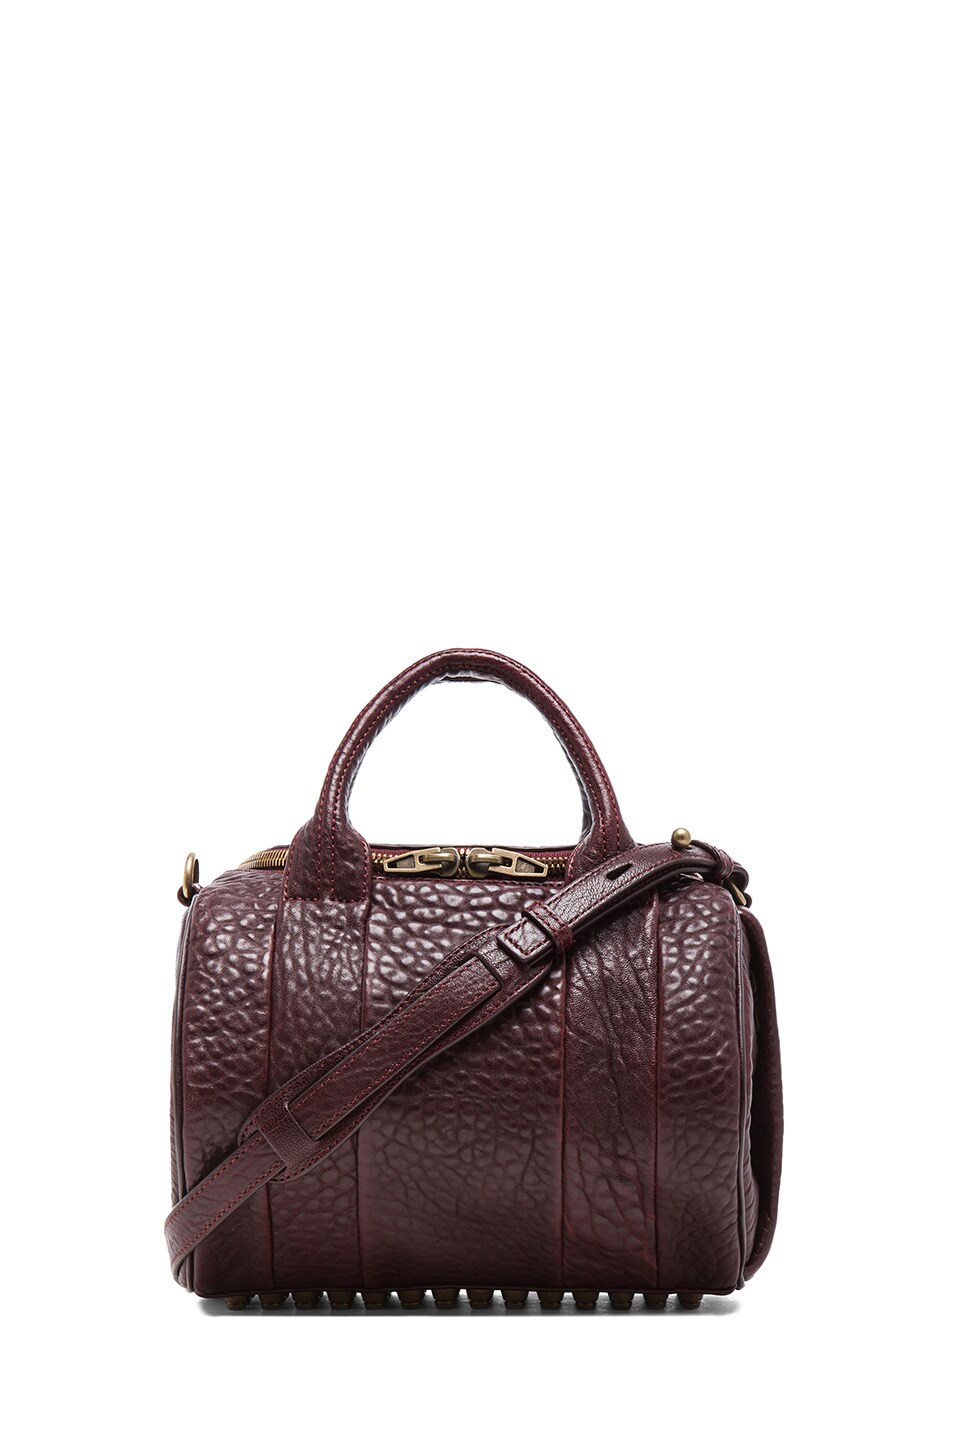 Image 1 of Alexander Wang Rockie Satchel with Antique Brass Hardware in Beet